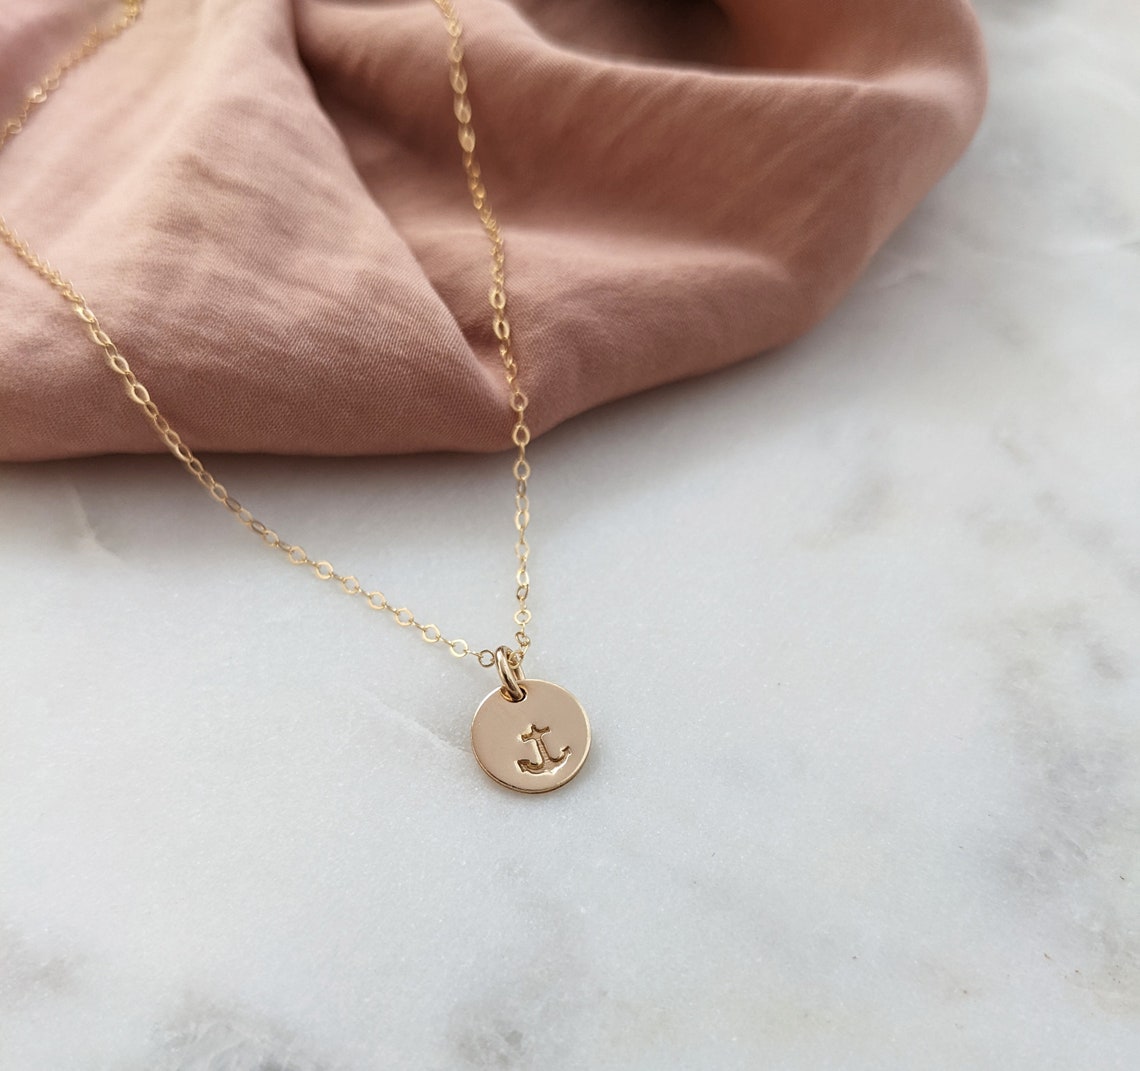 Tiny Anchor Necklace | 14k Gold Fill or Sterling Silver